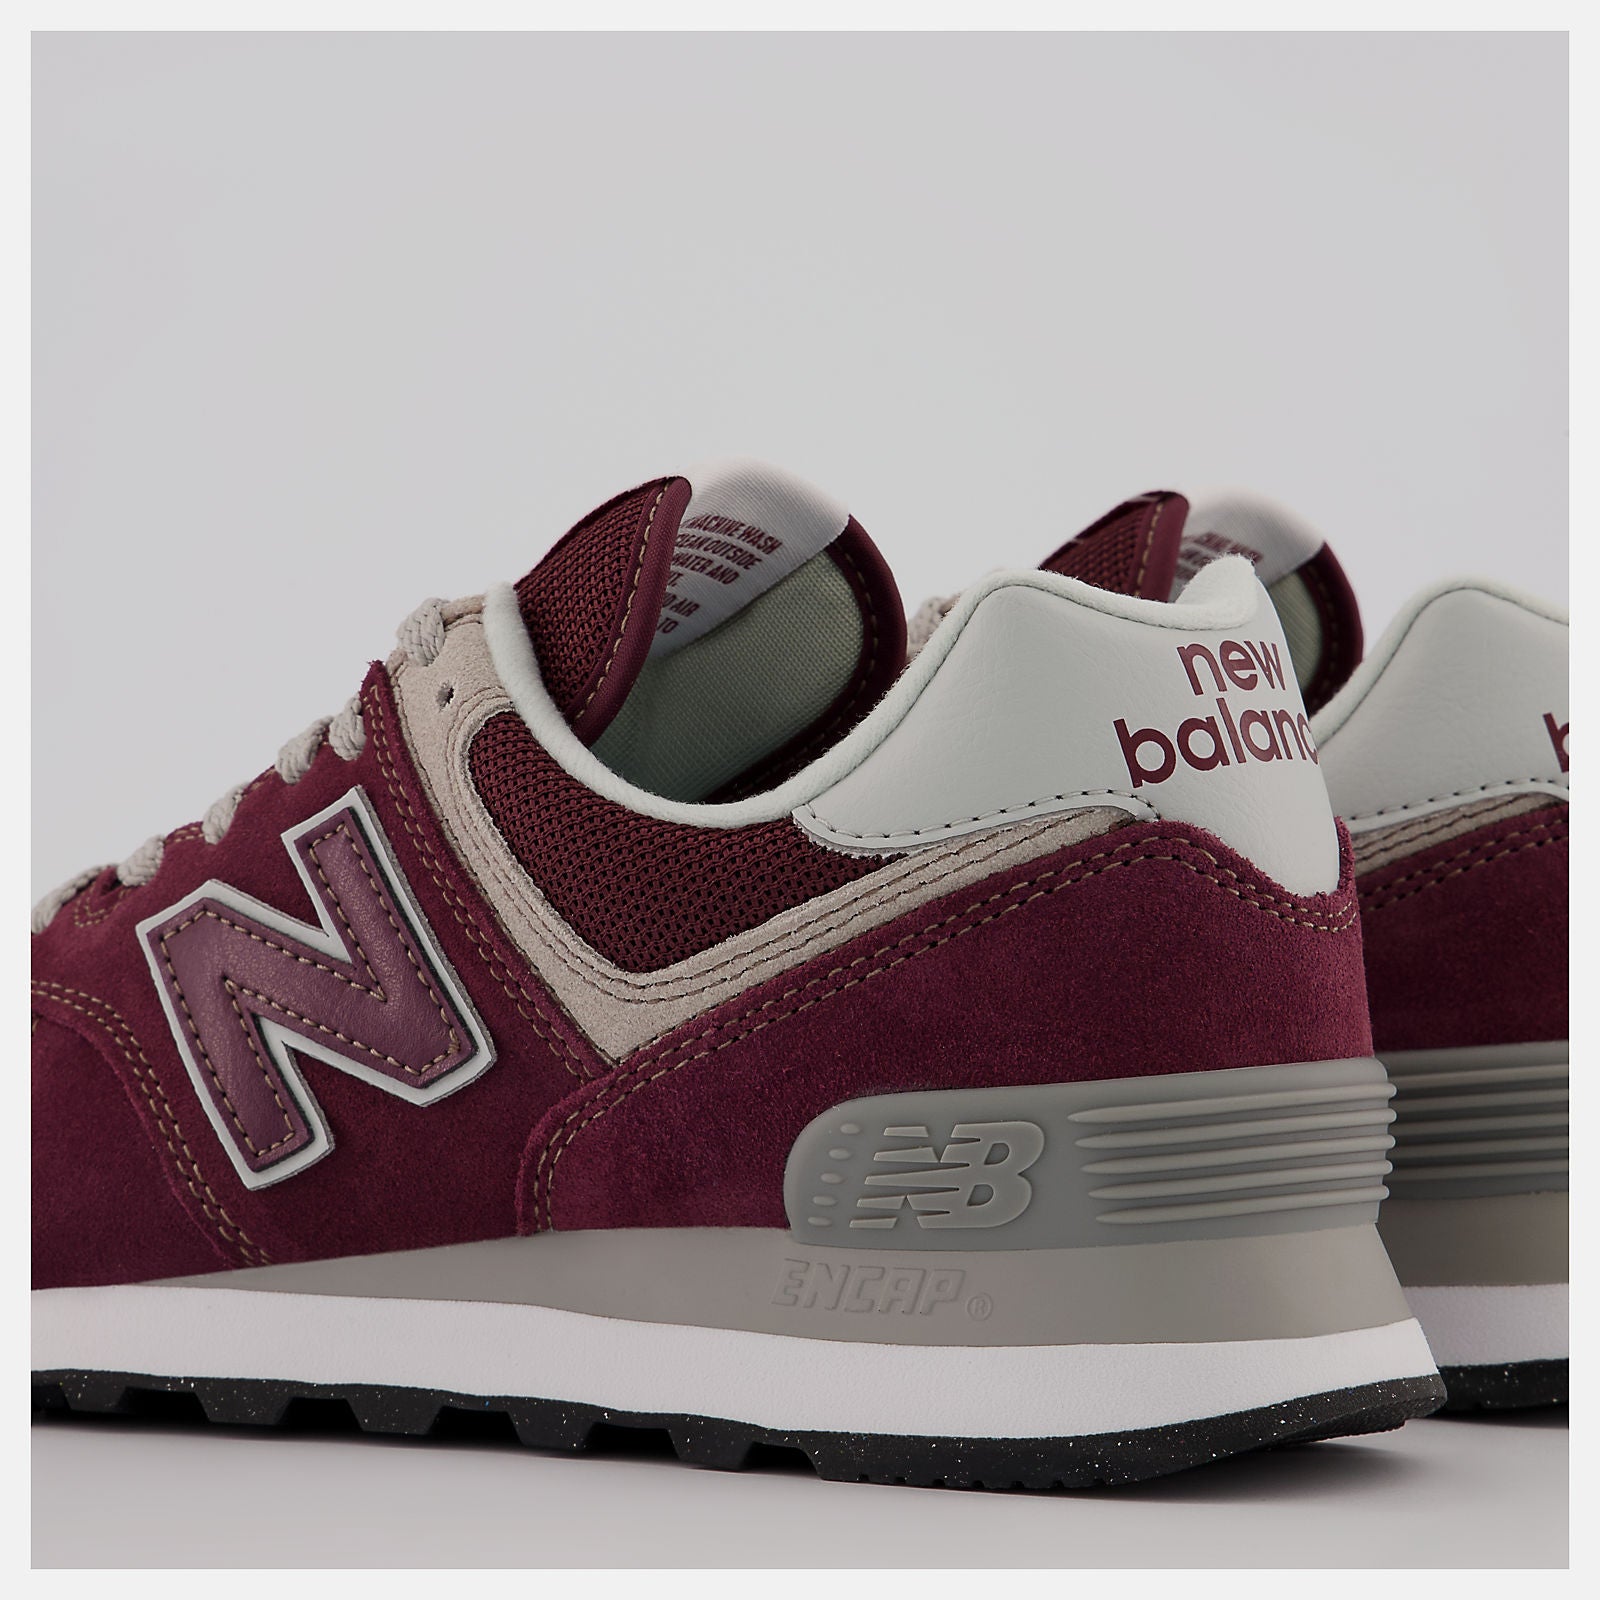 574 Burgundy with white